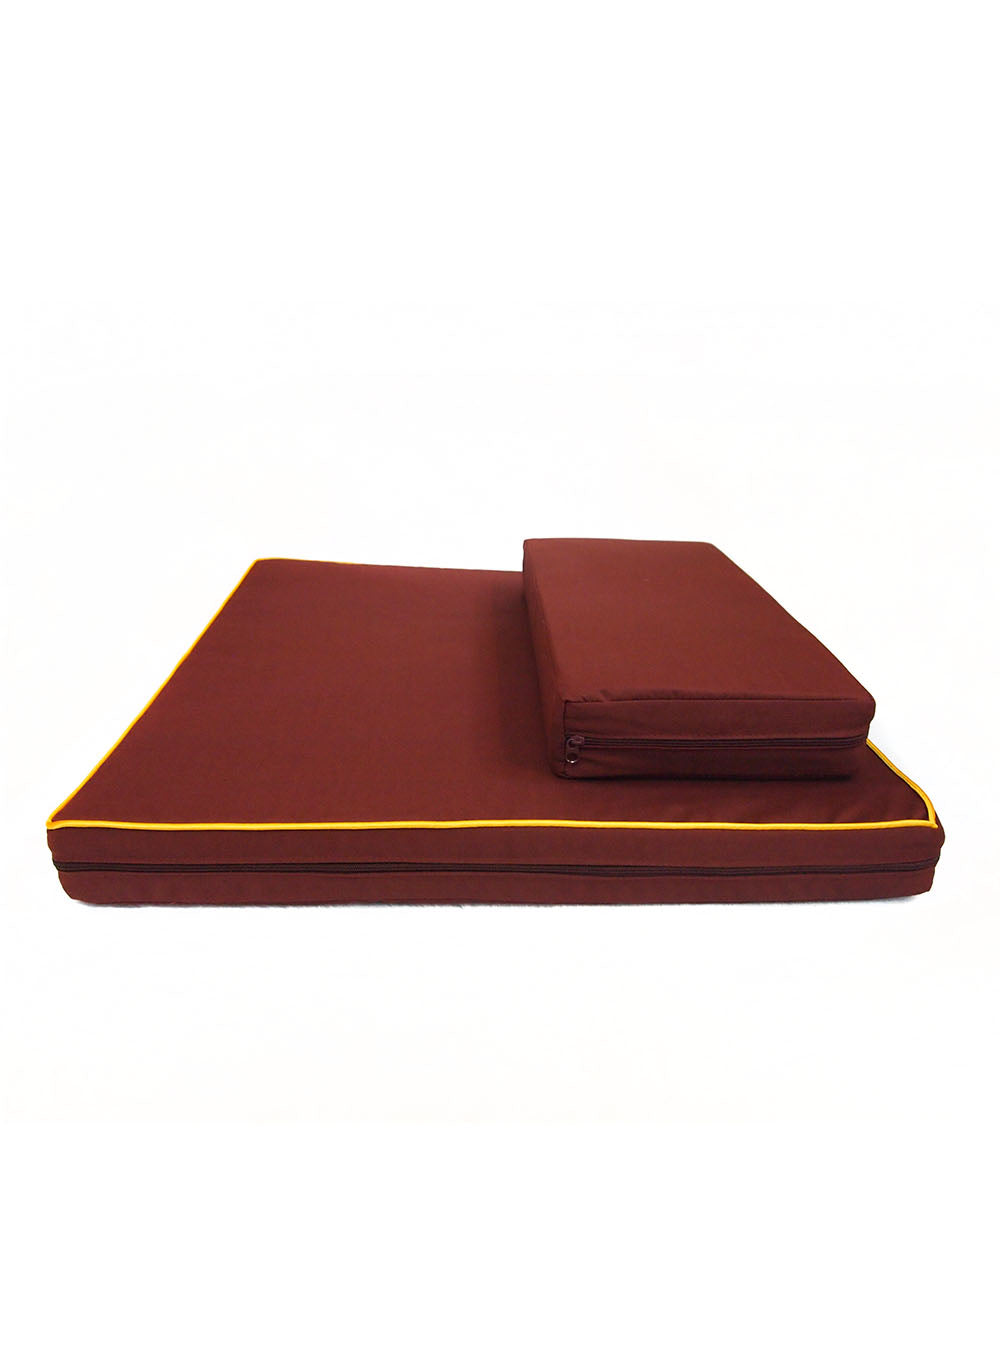 
					2-Pieces Large Meditation Cushion in Reddish Brown				